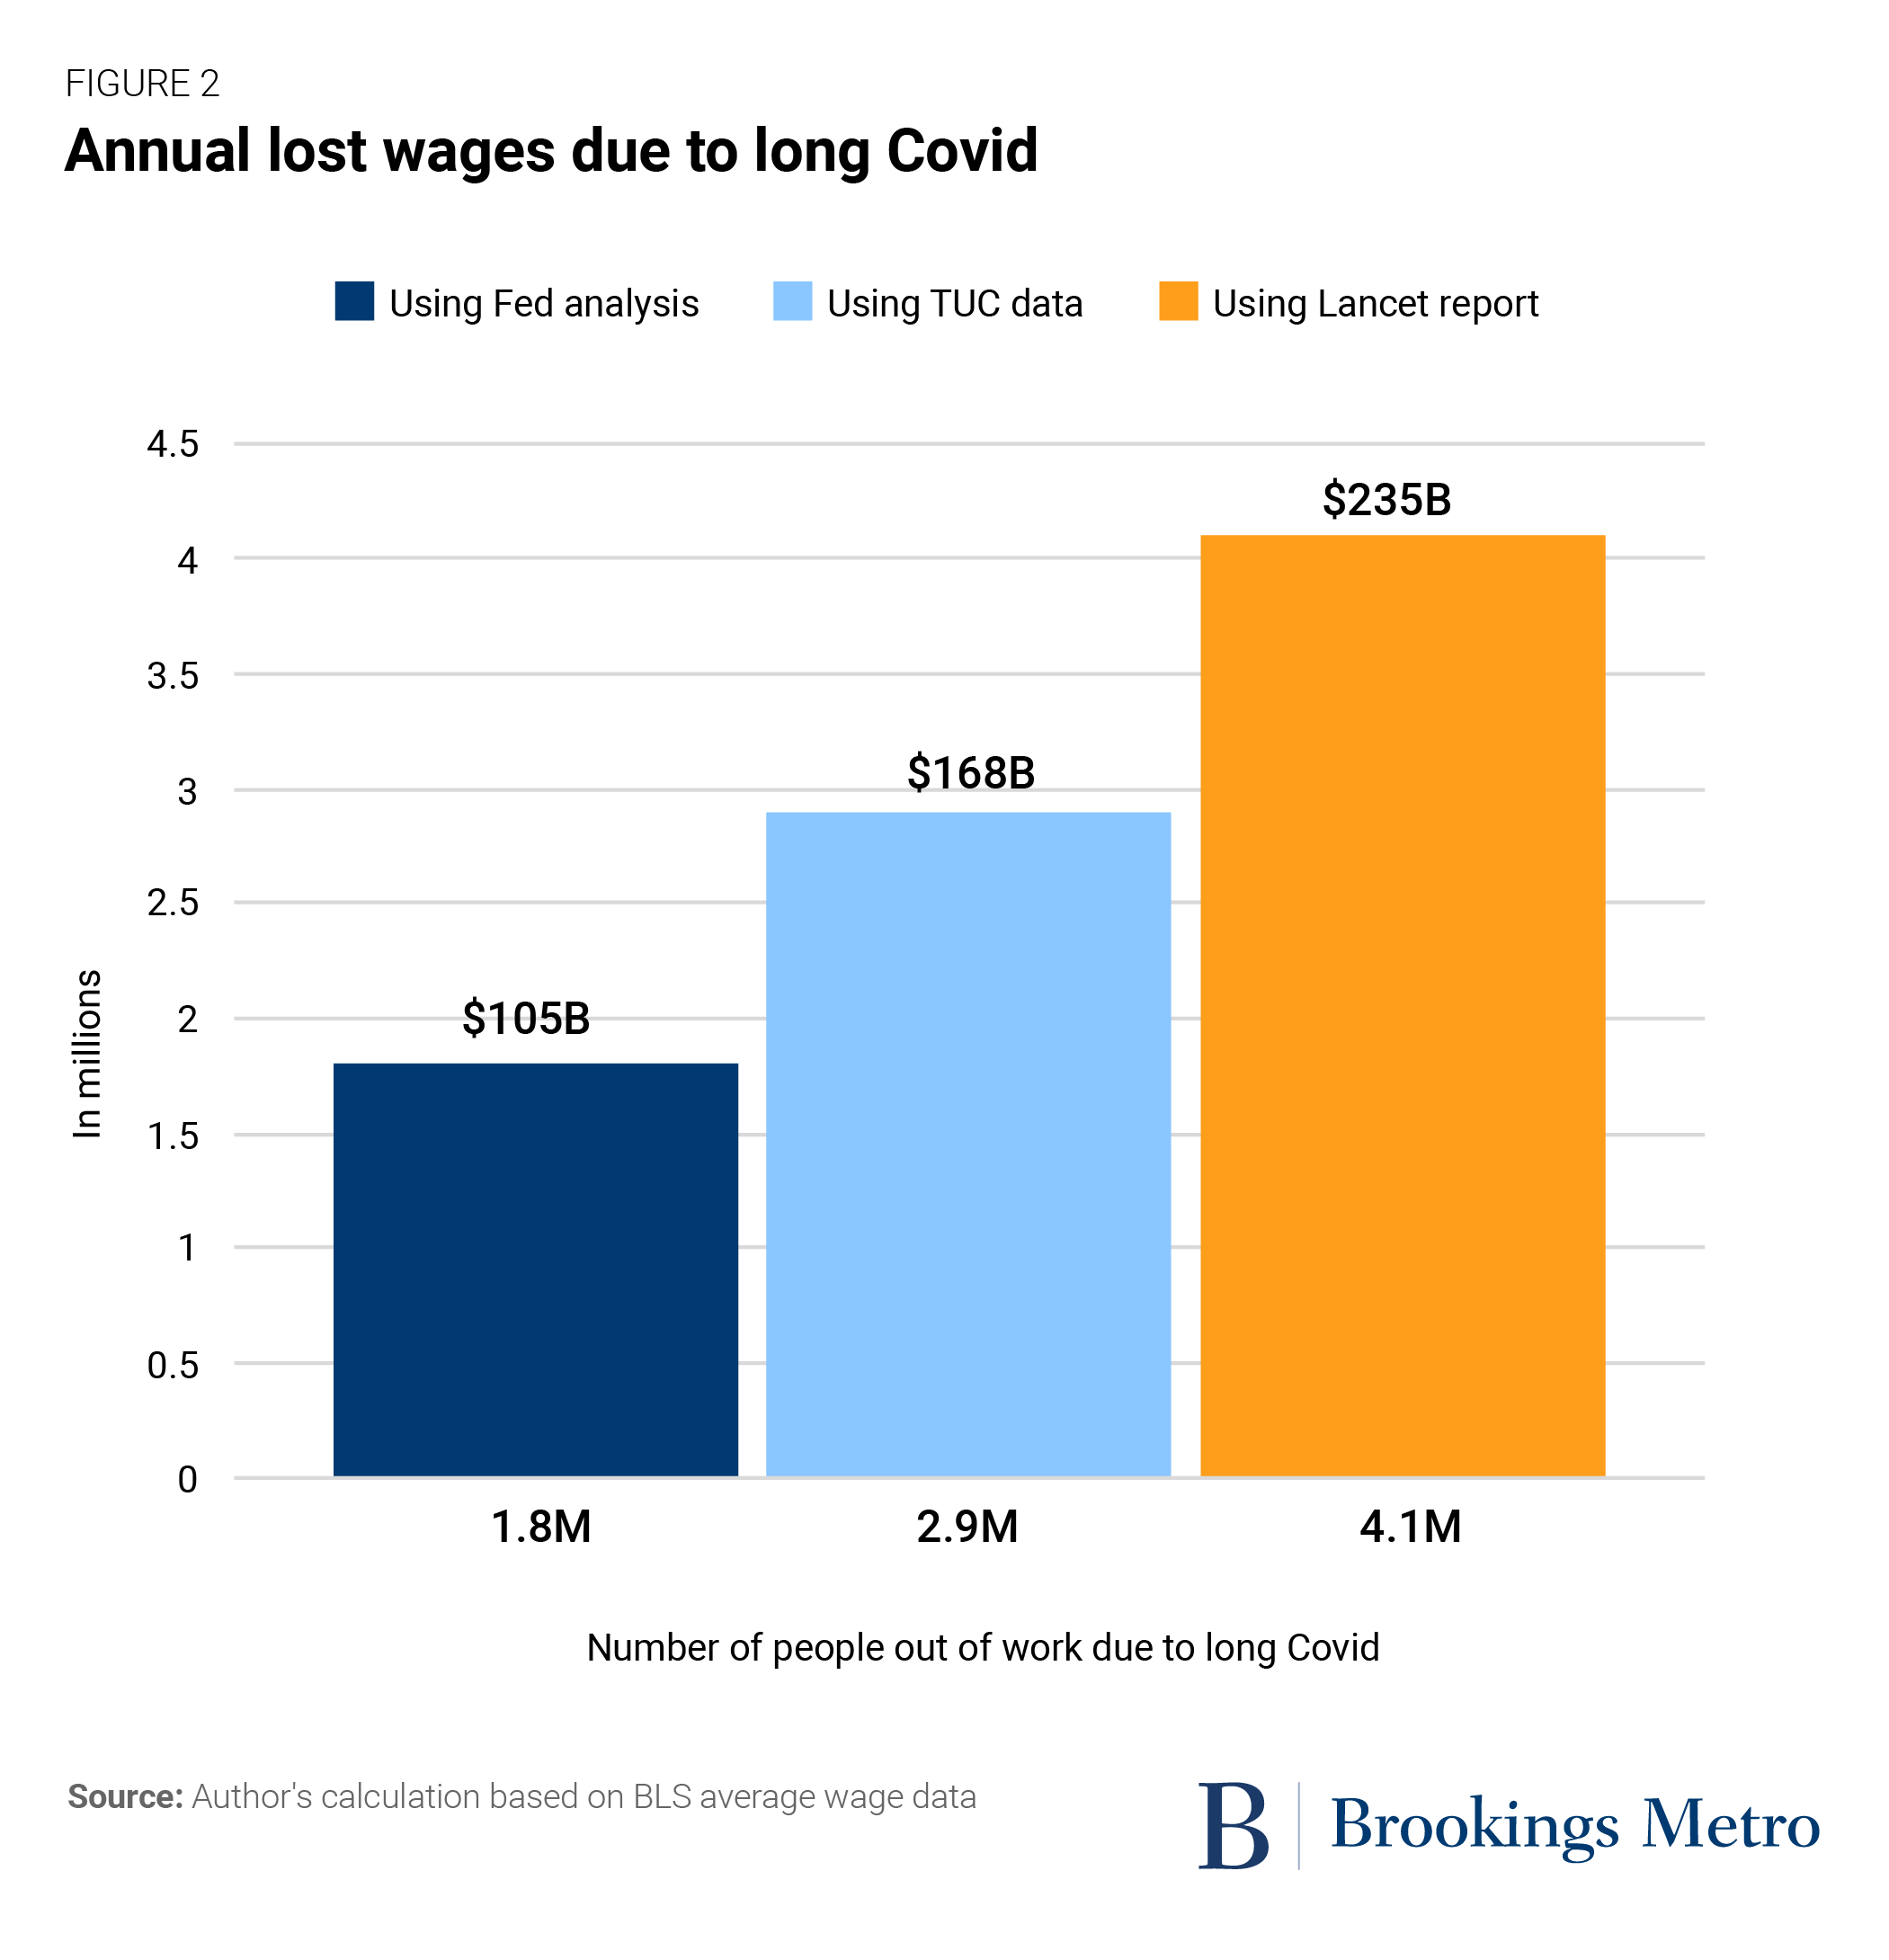 Annual lost wages due to long Covid